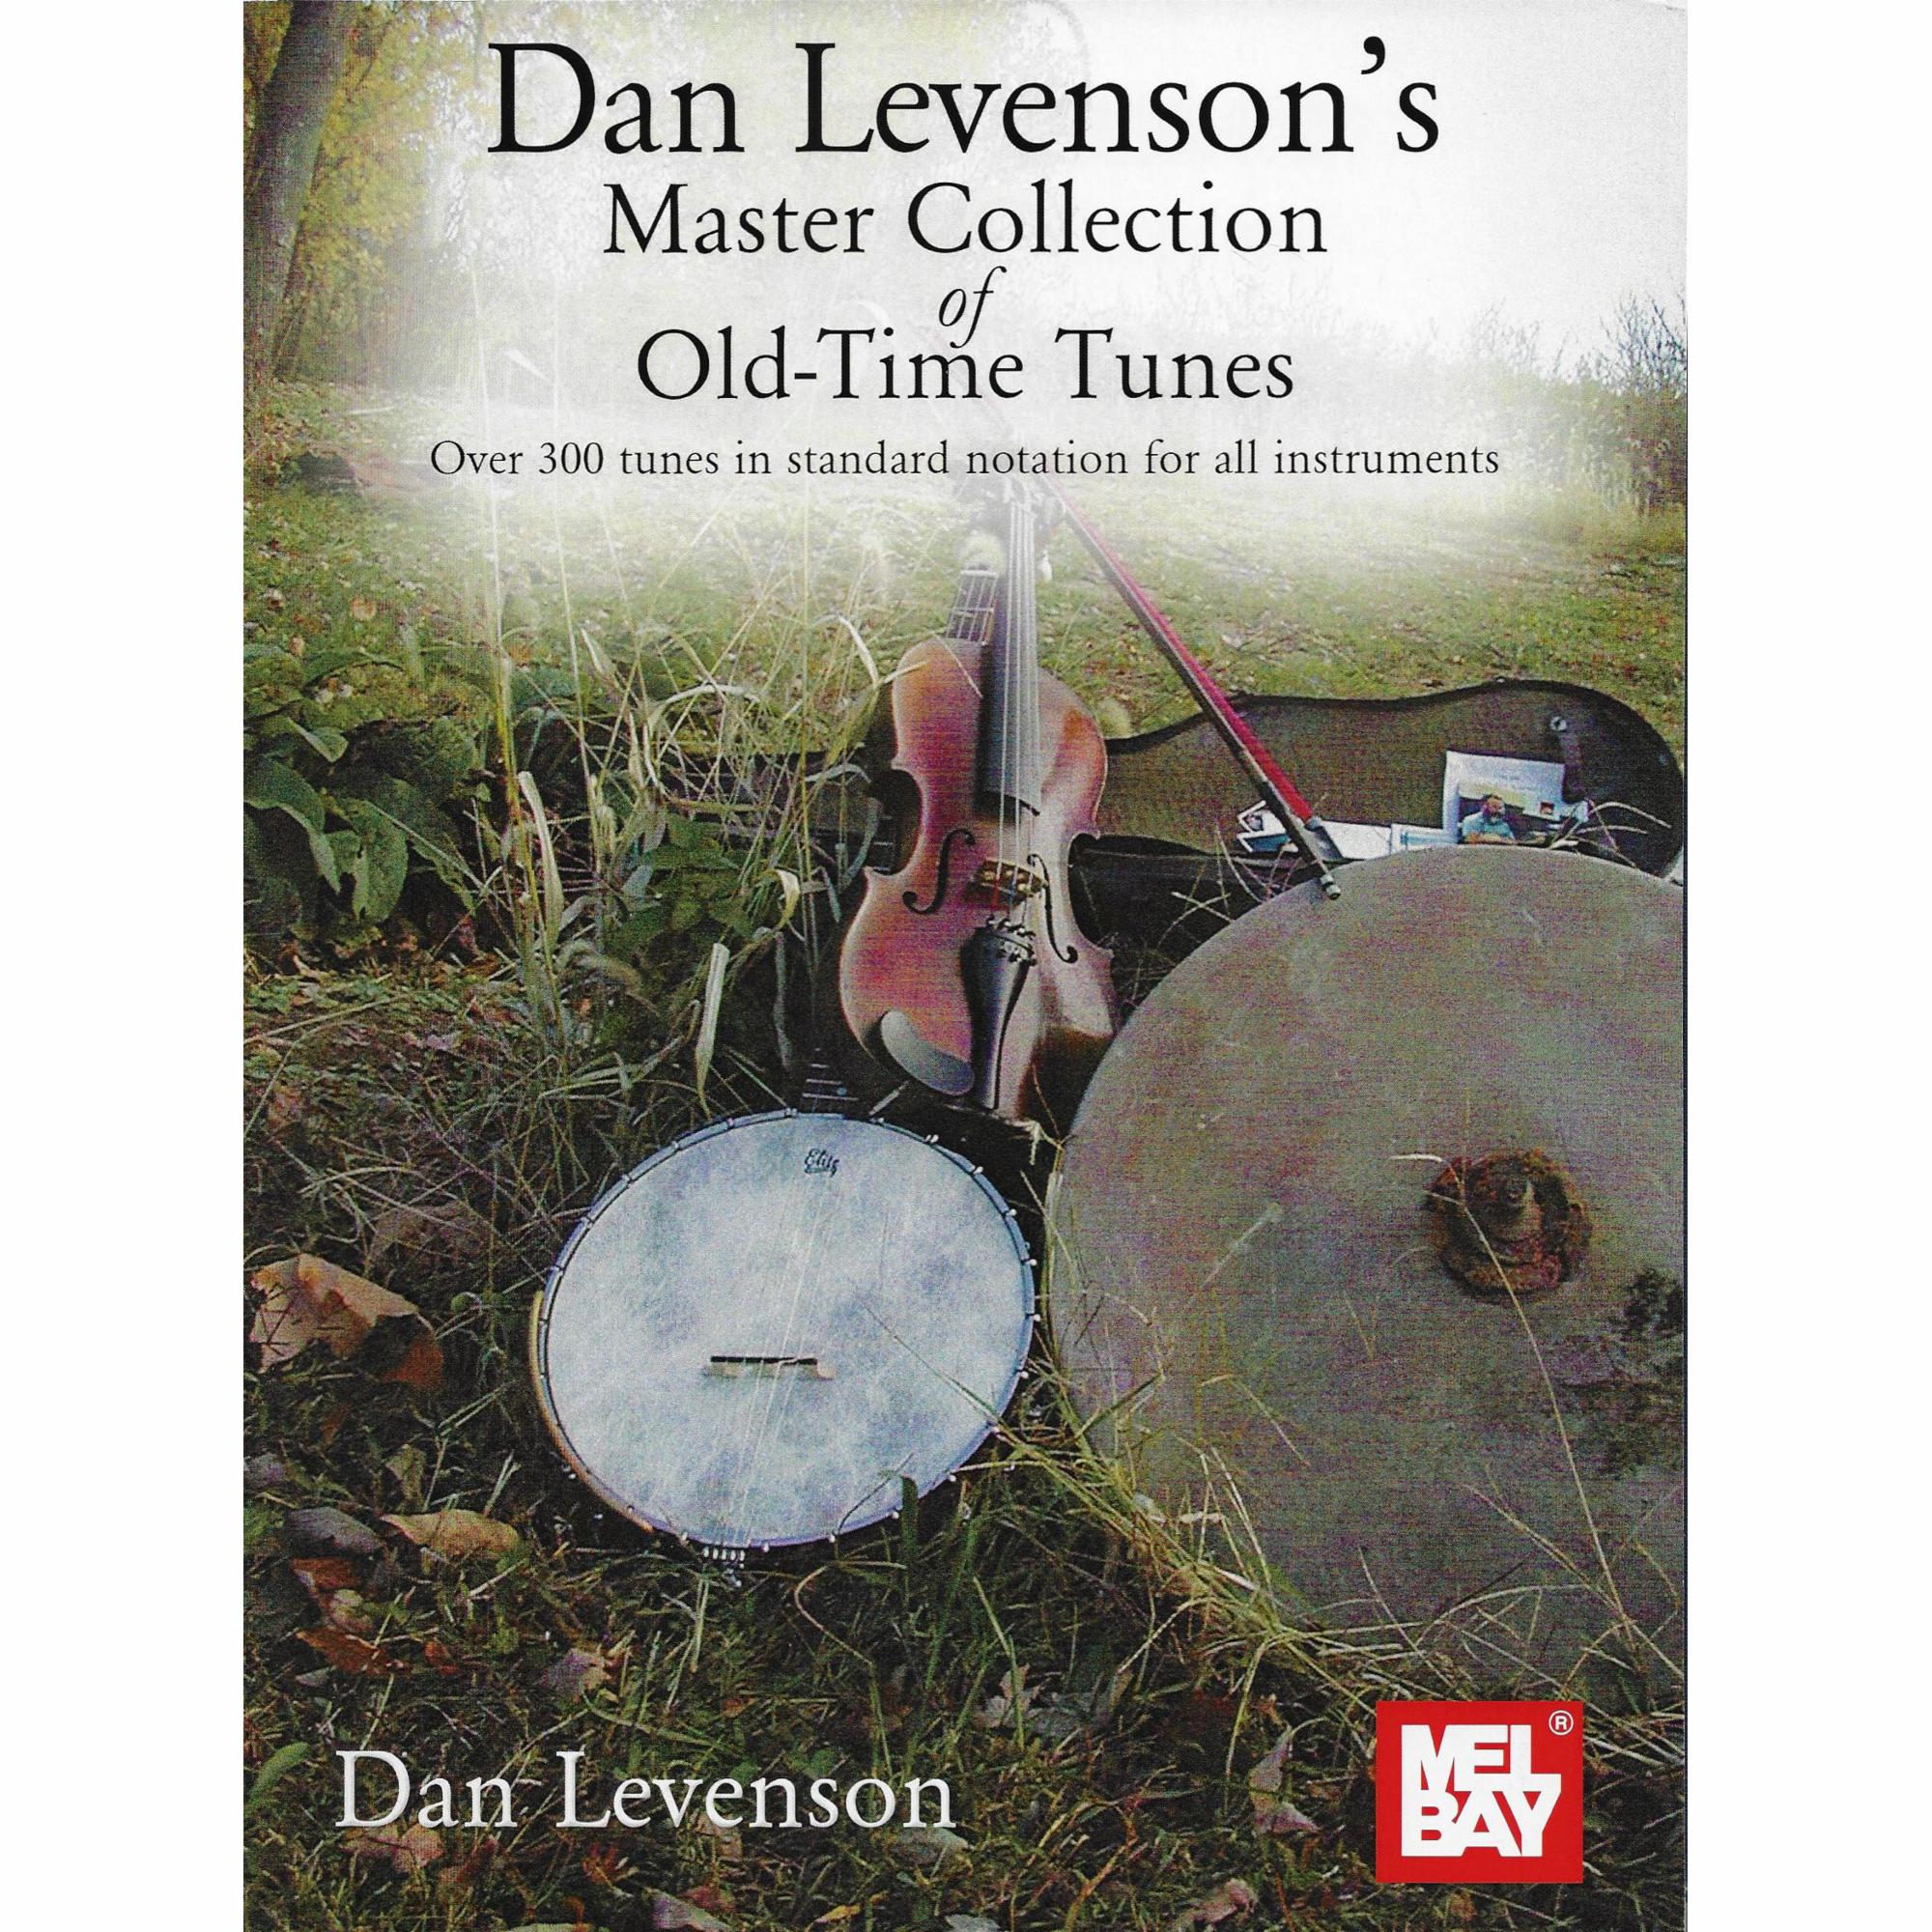 Dan Levenson's Master Collection of Old-Time Tunes for Violin